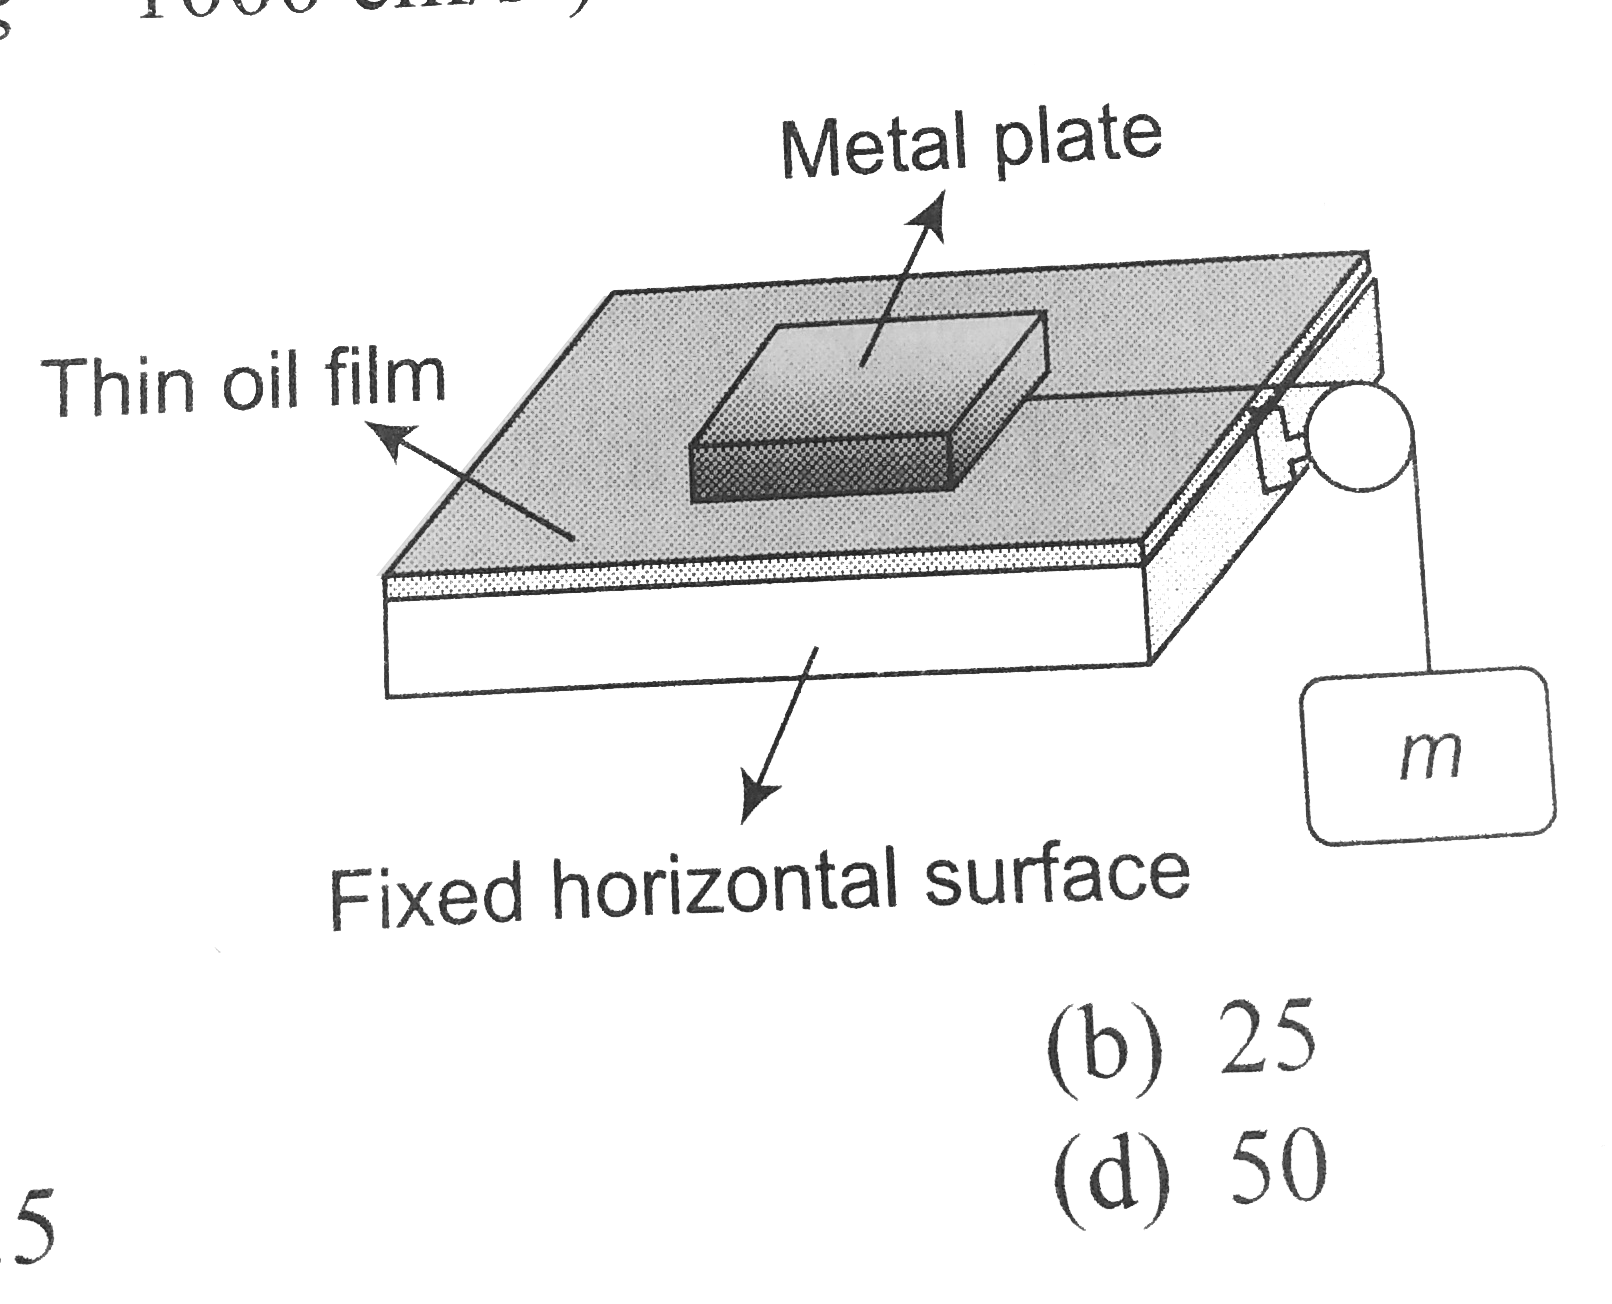 A rectangular metal plate has dimensions of 10cmxx20cm. A thin film of oil separates the plate from a fixed horizontal surface. The separation between the rectangular plate and the horizontal surface is 0.2mm. An ideal string is attached to the plate and passes over an ideal pulley to a mass m. When m=125gm, the metal plate moves at constant speed of 5(cm)/(s), across the horizontal surface. Then the coefficient of viscosity of oil in (dyne-s)/(cm^2) is (Use g=1000(cm)/(s^2))